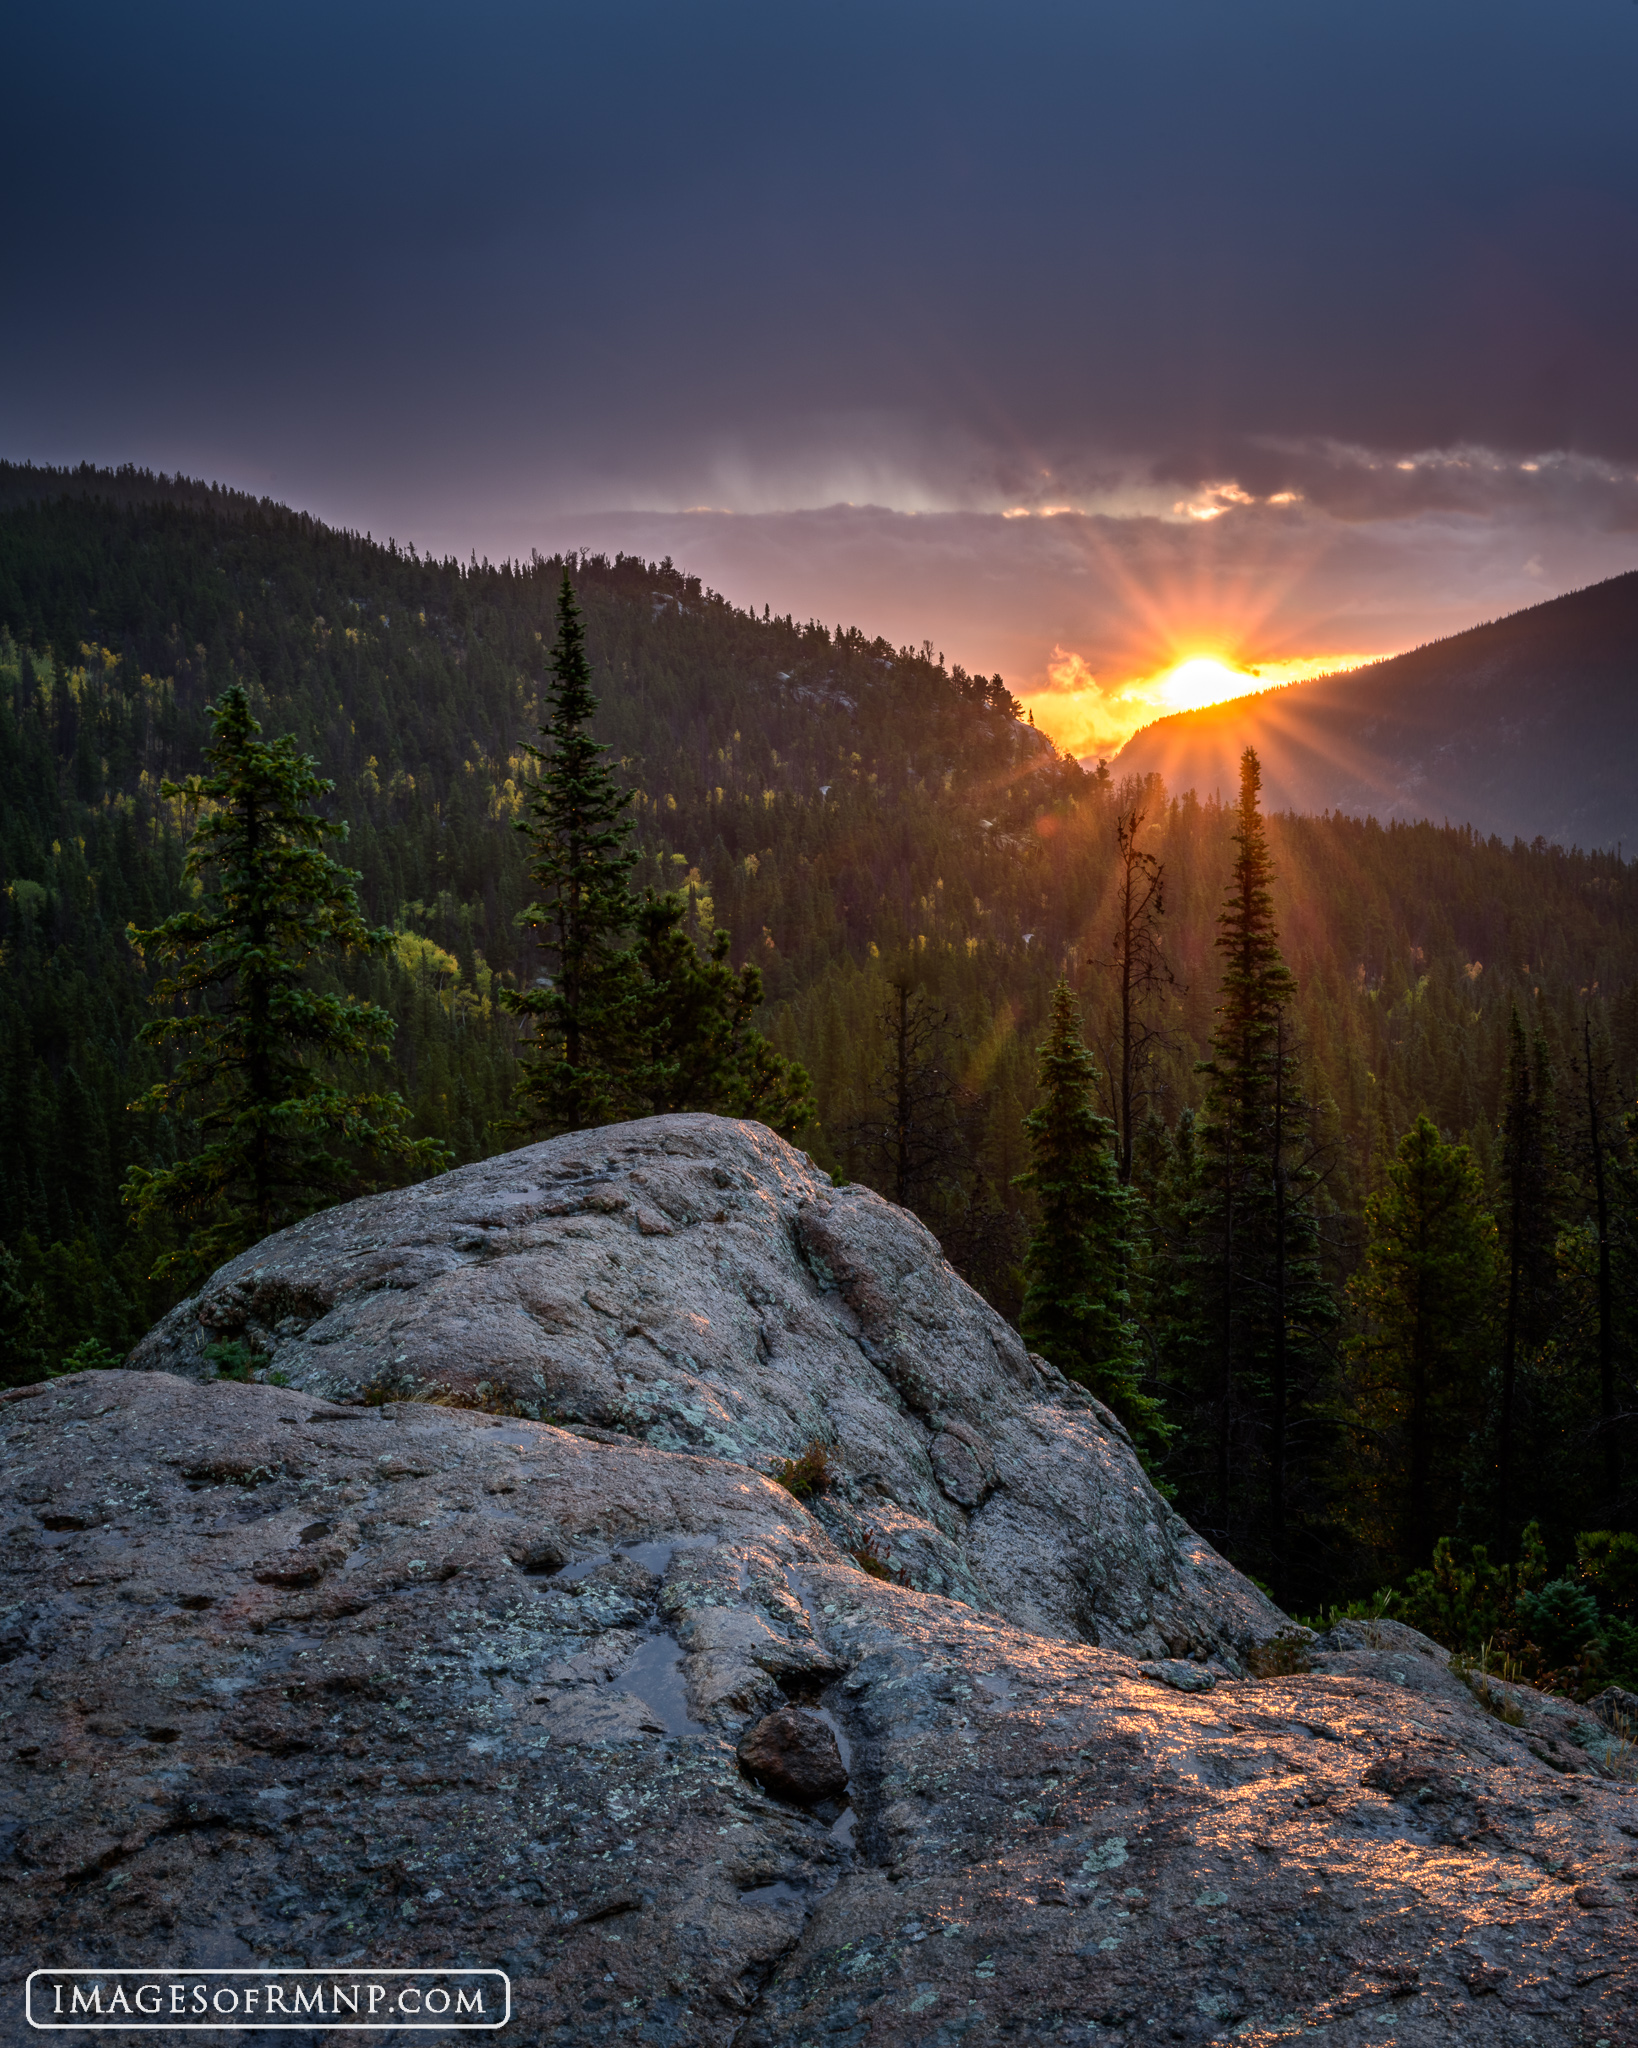 For more information on this image and for purchasing options,please call the Image of RMNP gallery at 970-586-4352.